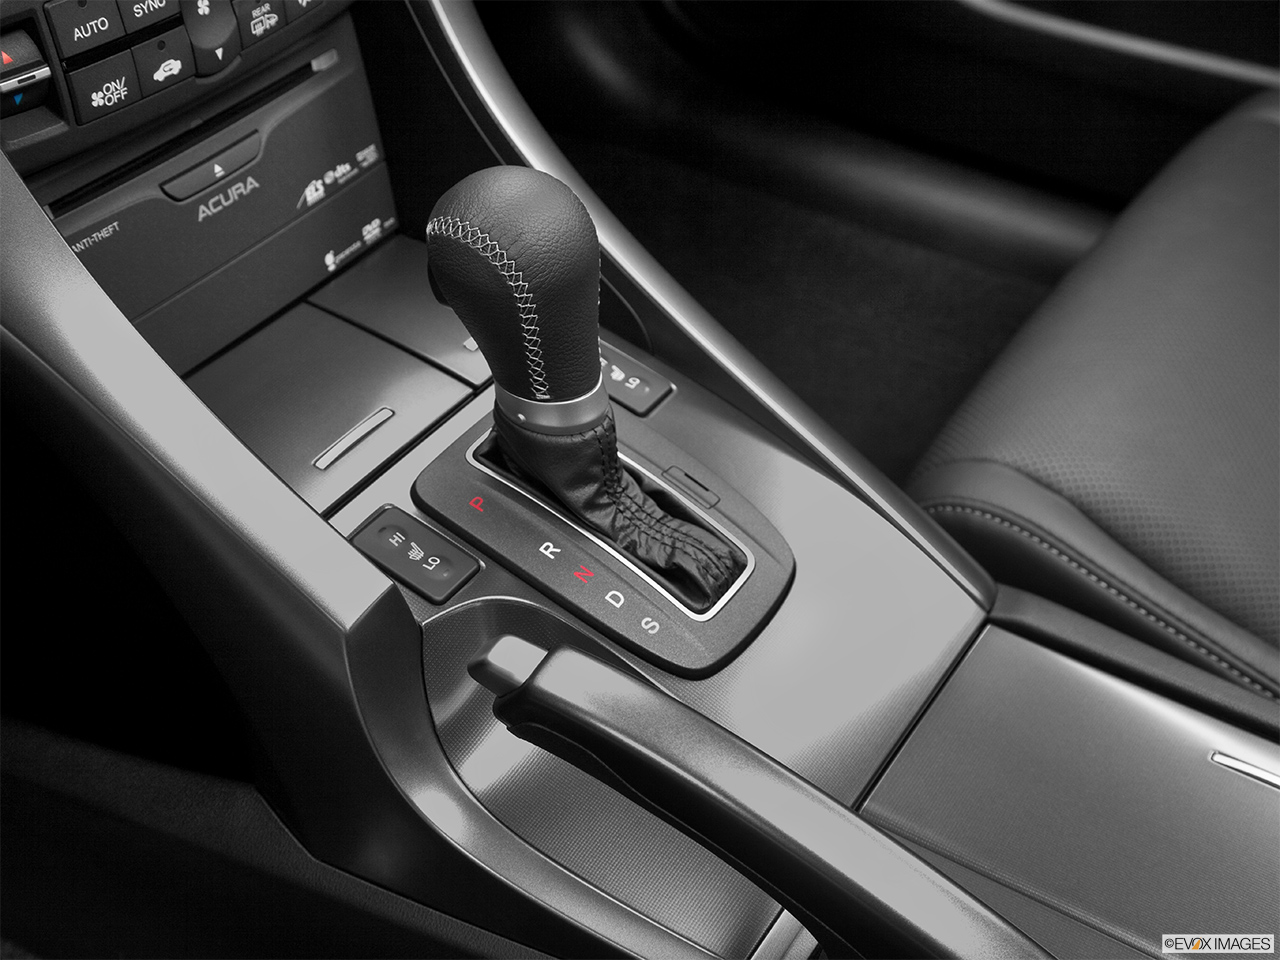 2013 Acura TSX 5-Speed Automatic Gear shifter/center console. 